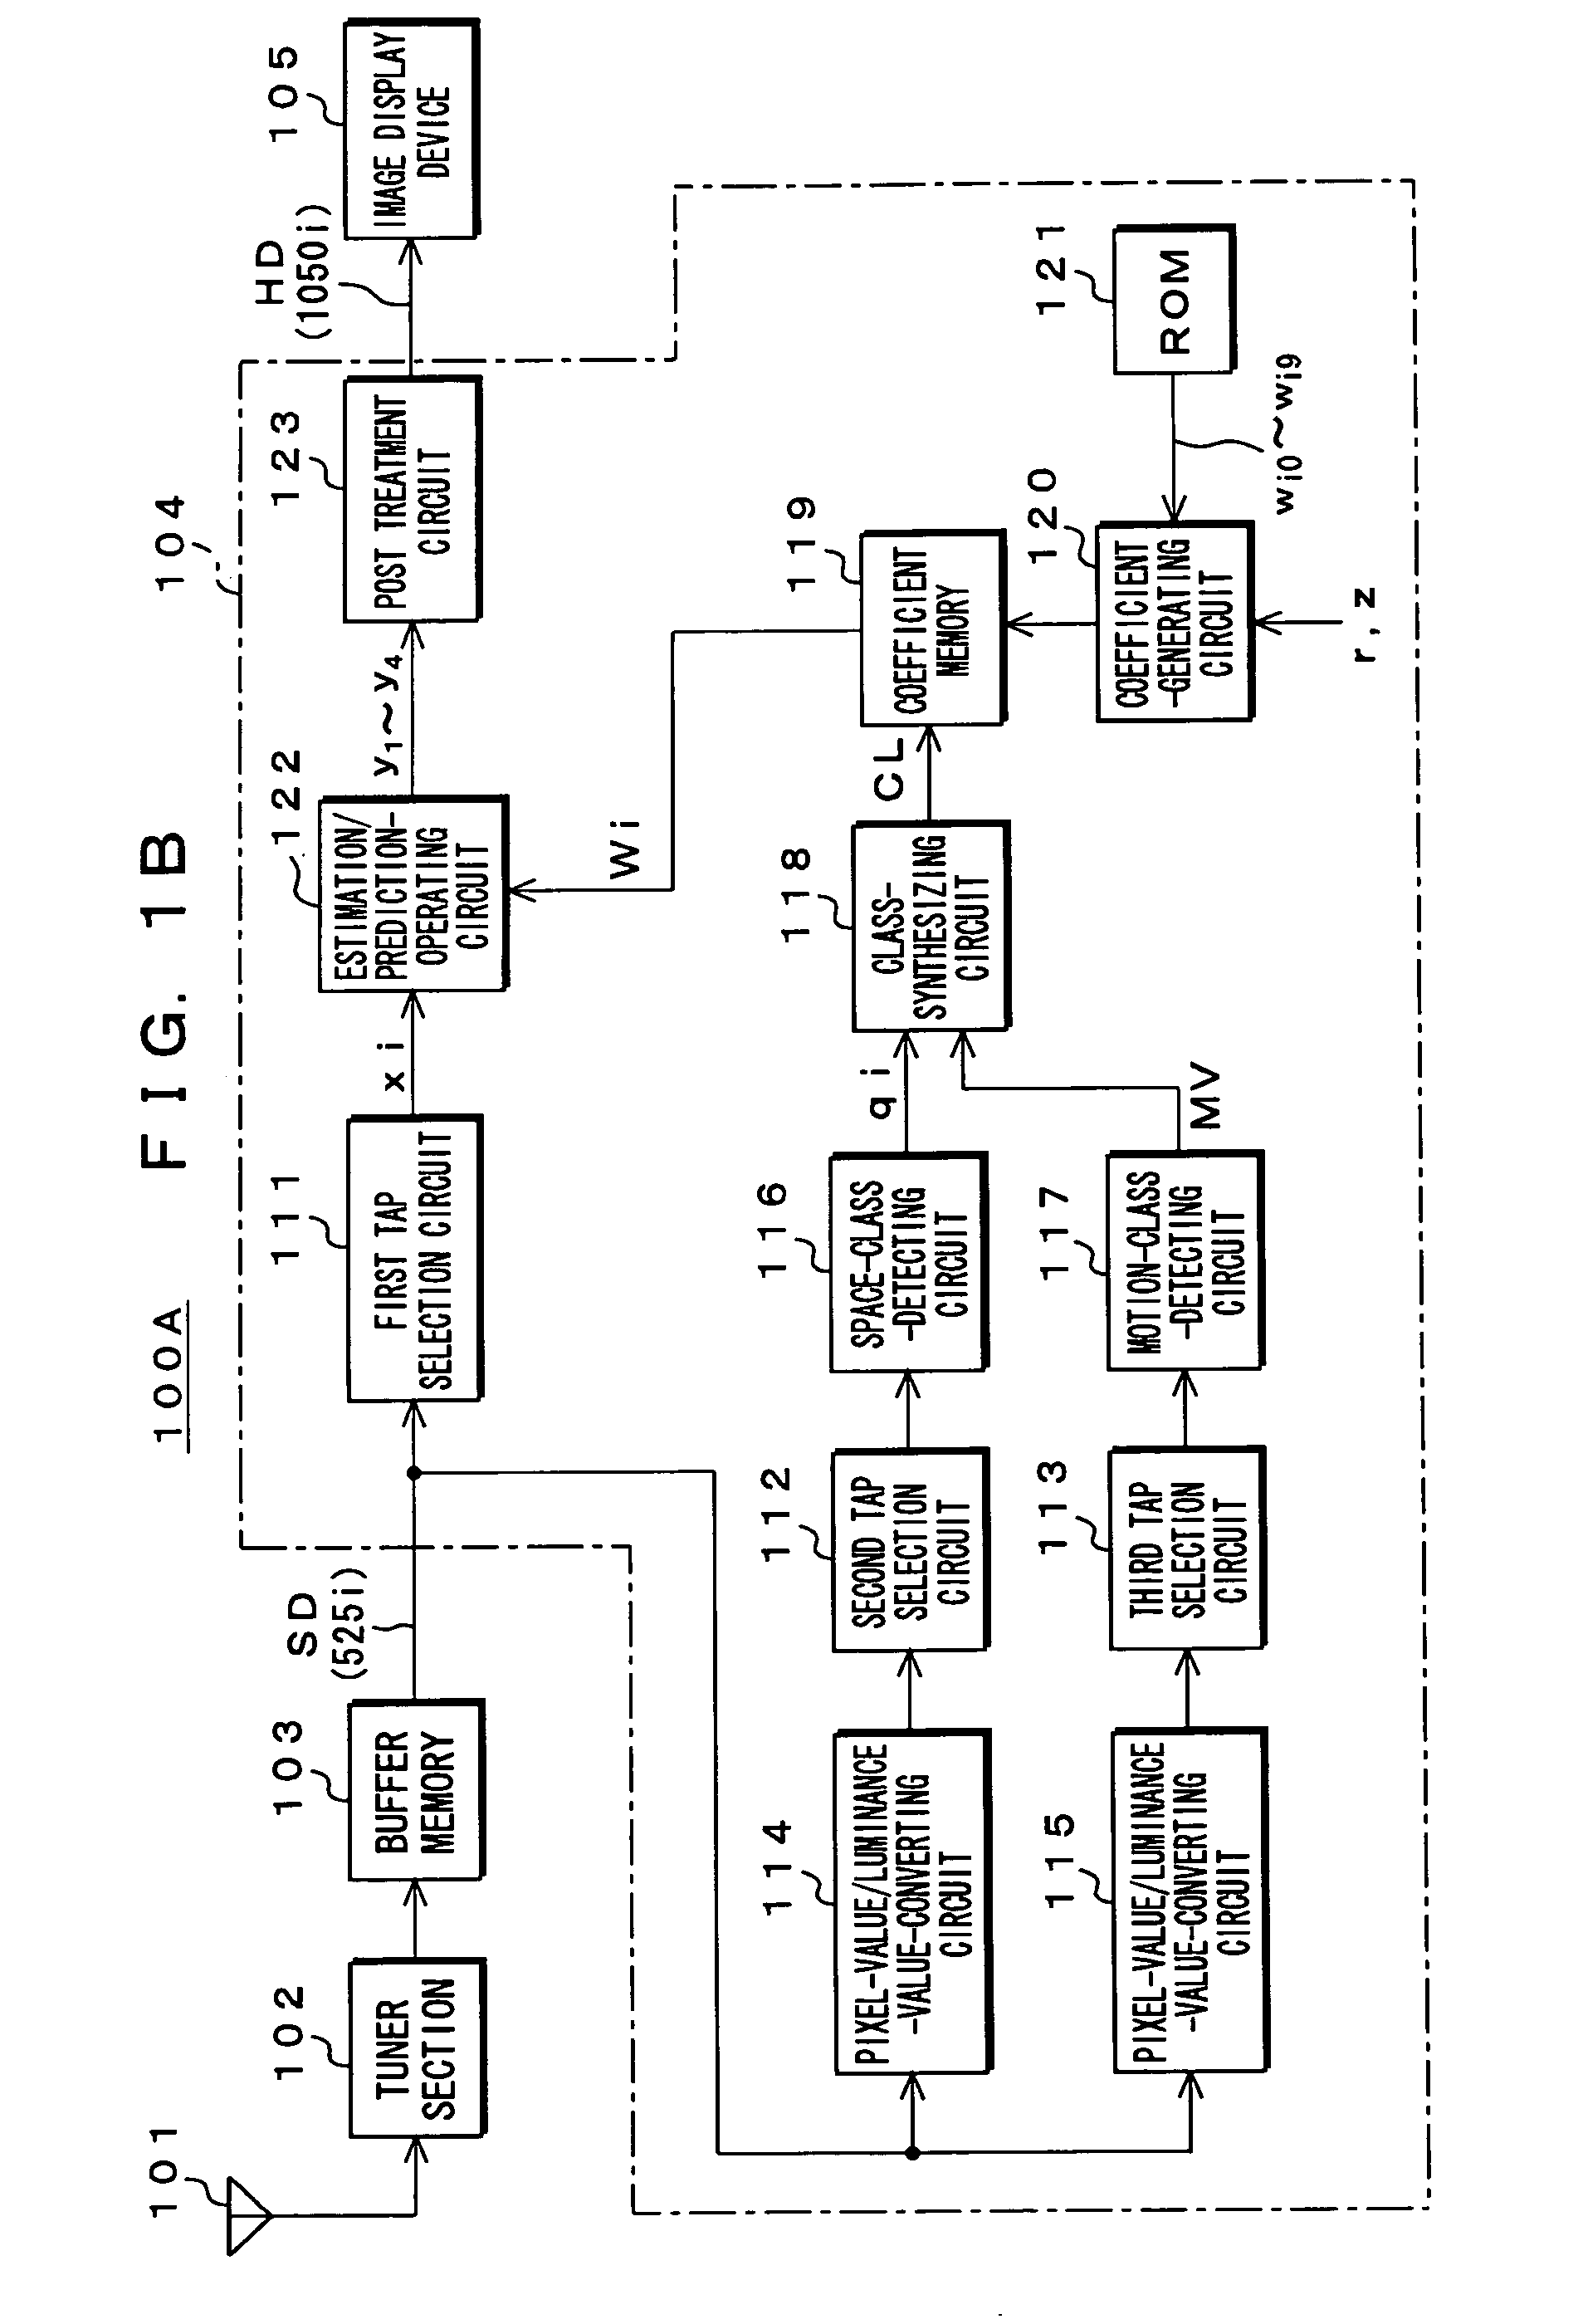 Apparatus and method for processing informational signal